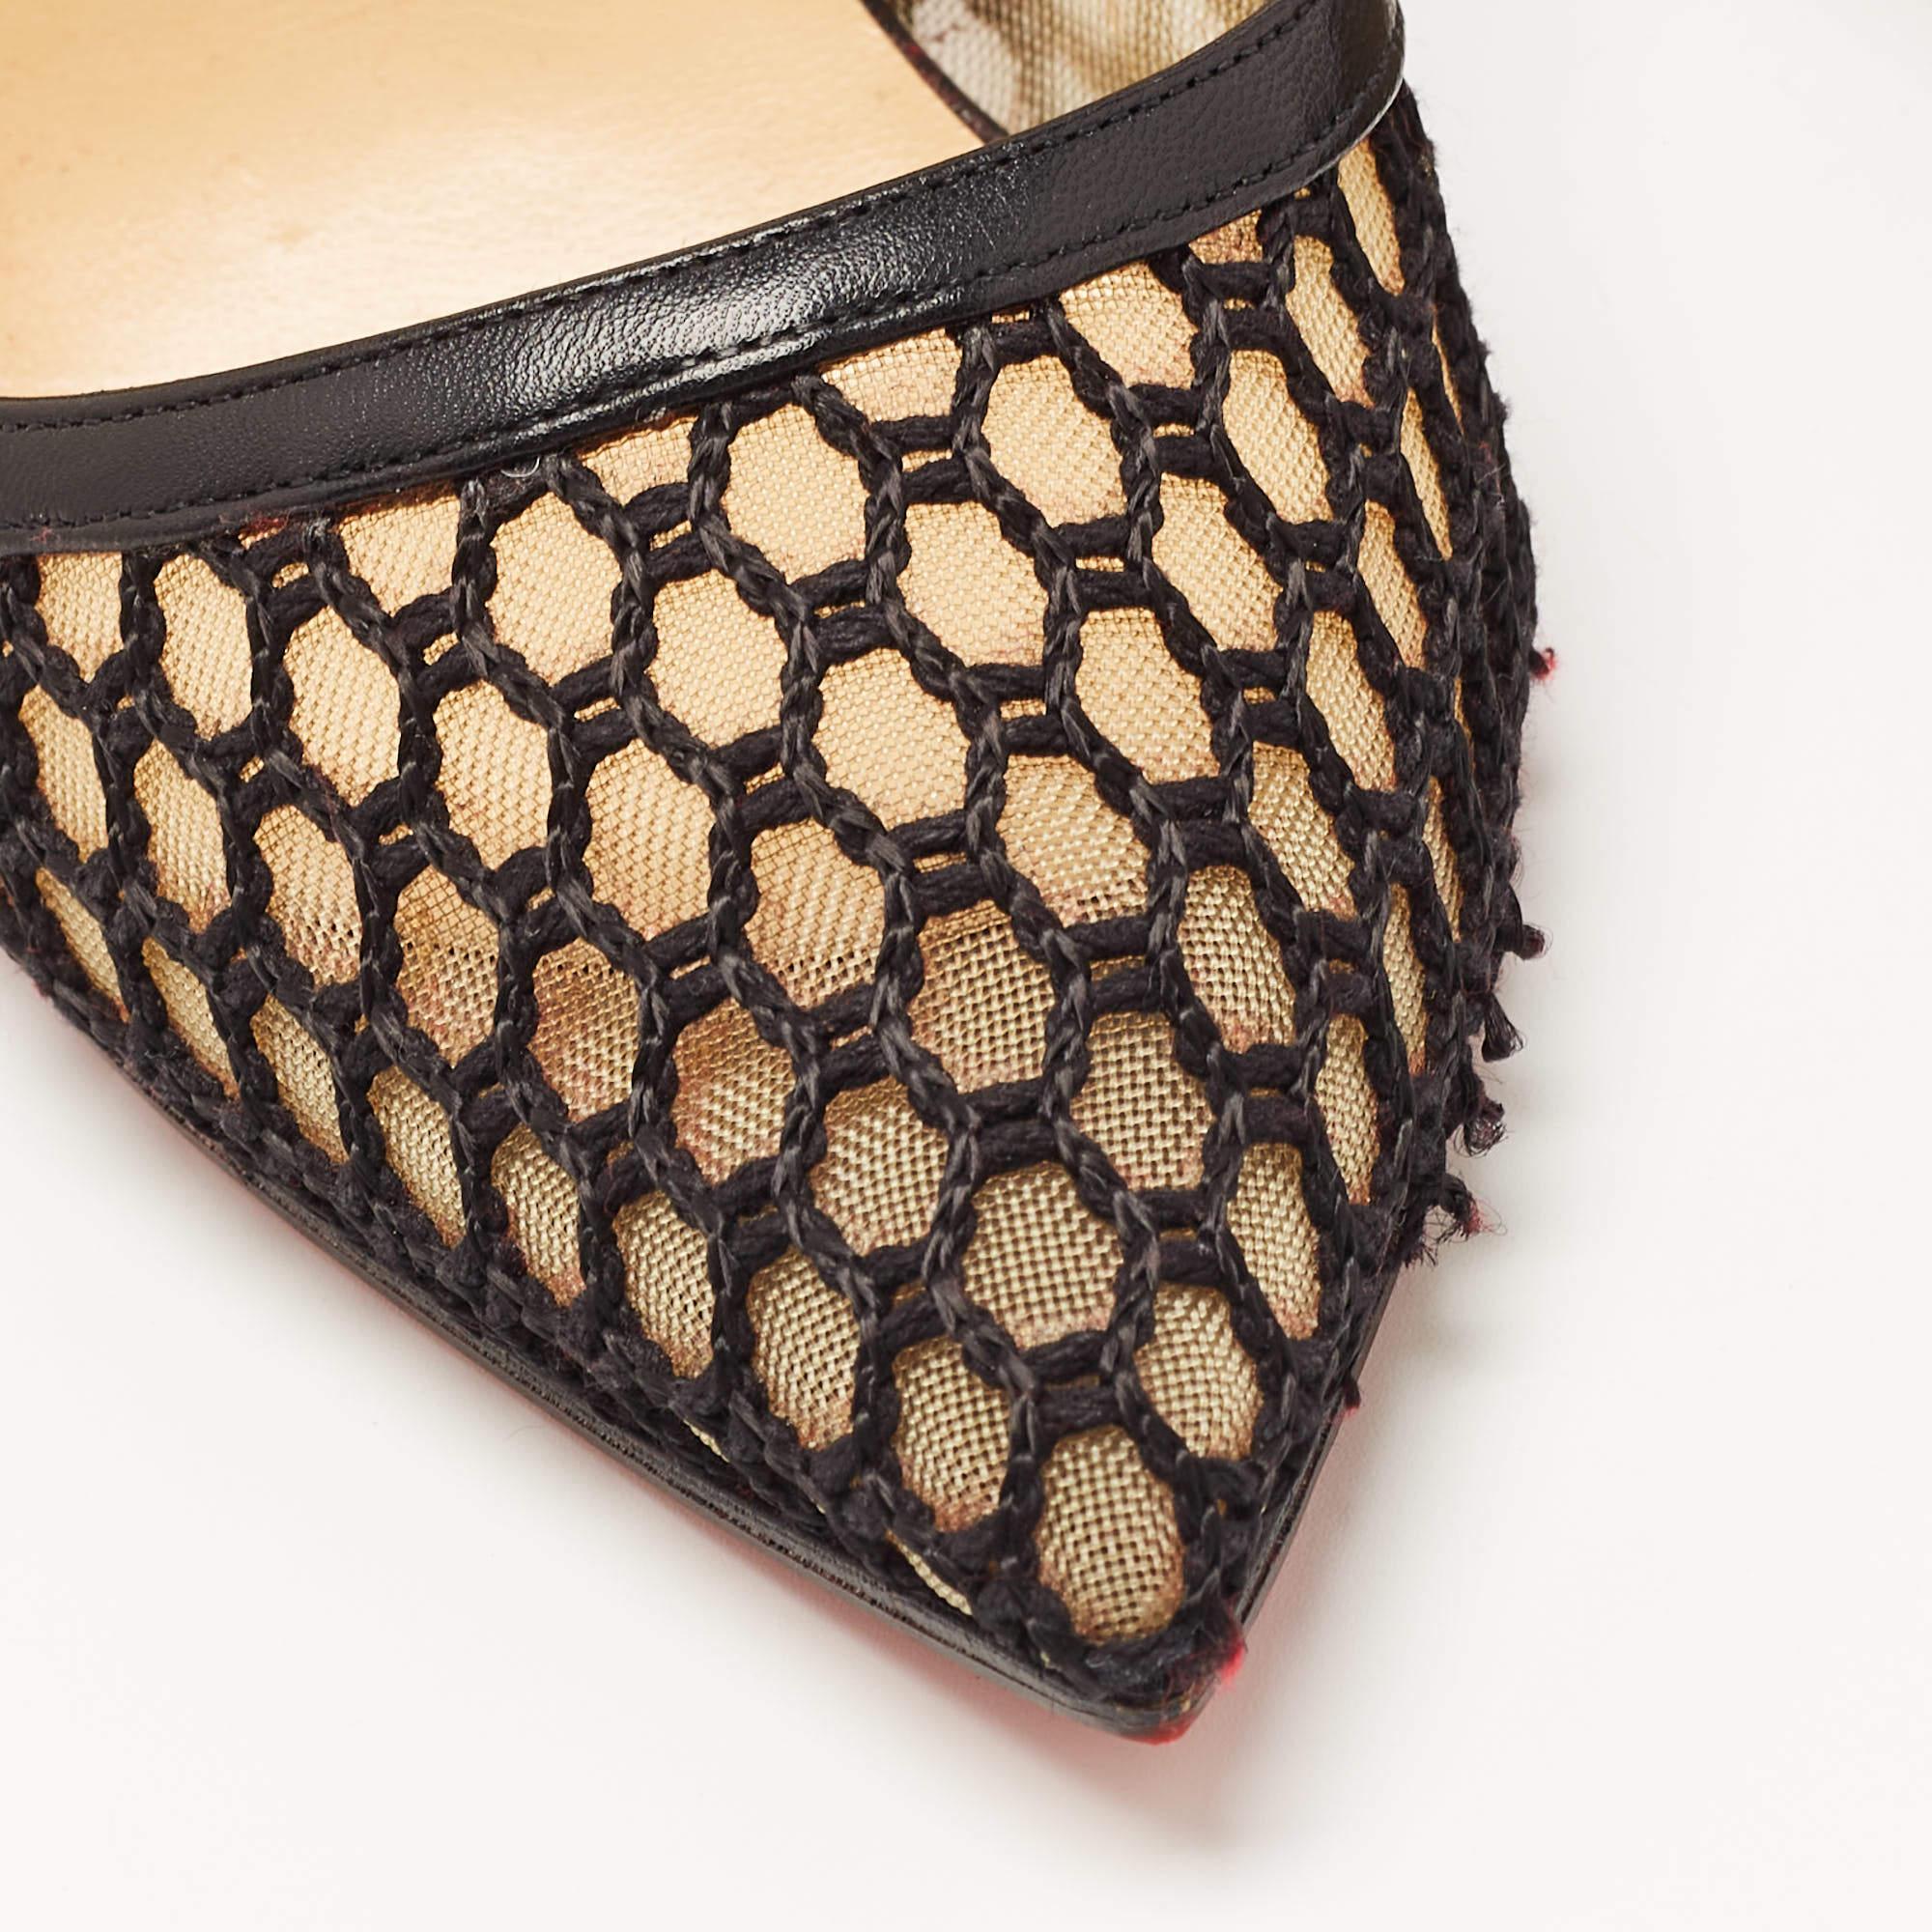 Christian Louboutin Black Leather and Mesh Miluna Slingback Pumps Size 37.5 For Sale 4